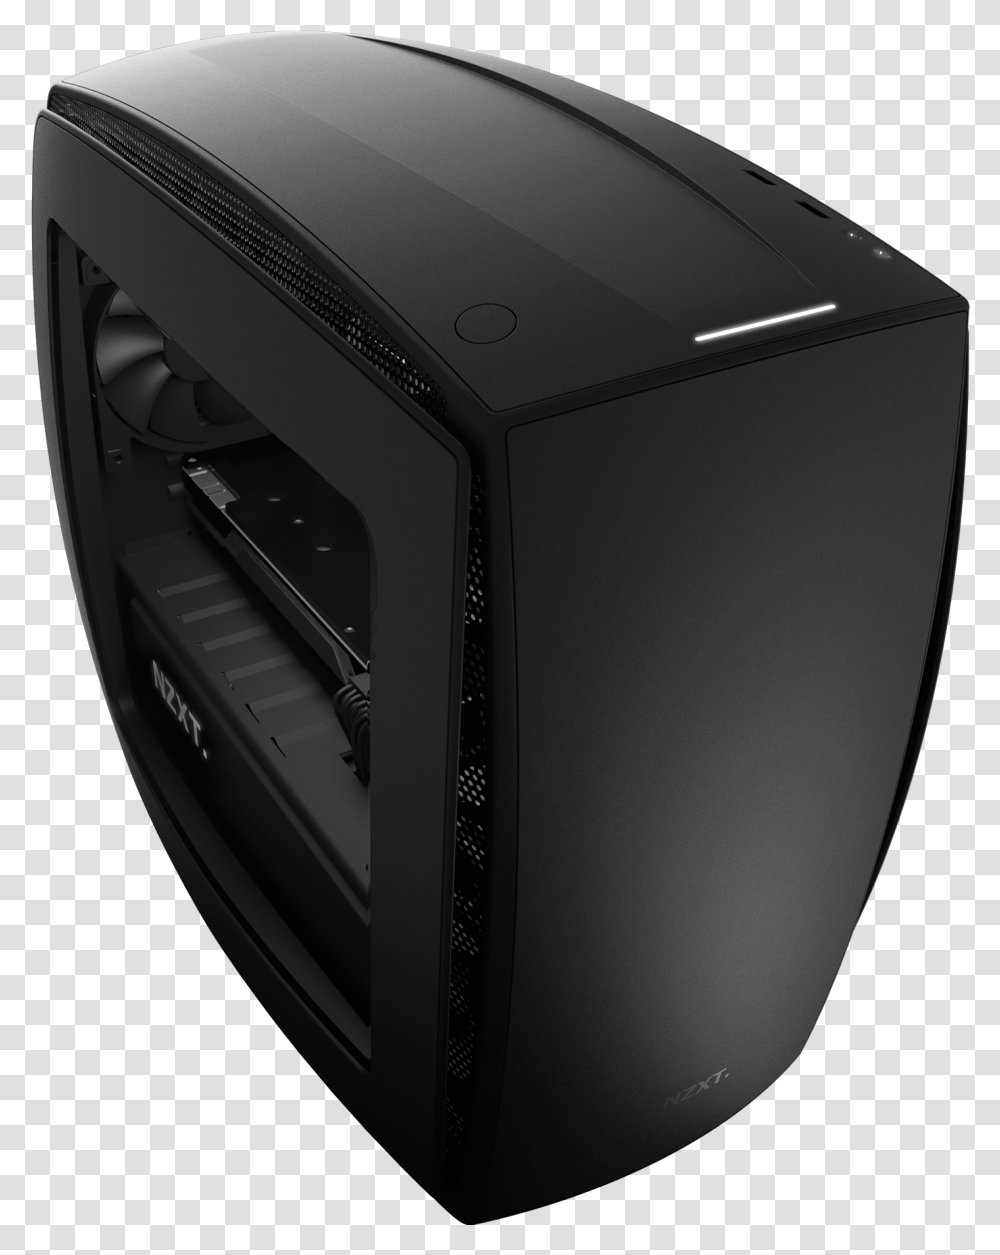 Nzxt Manta Itx Case Curved Pc Case, Electronics, Computer, Hardware, Screen Transparent Png